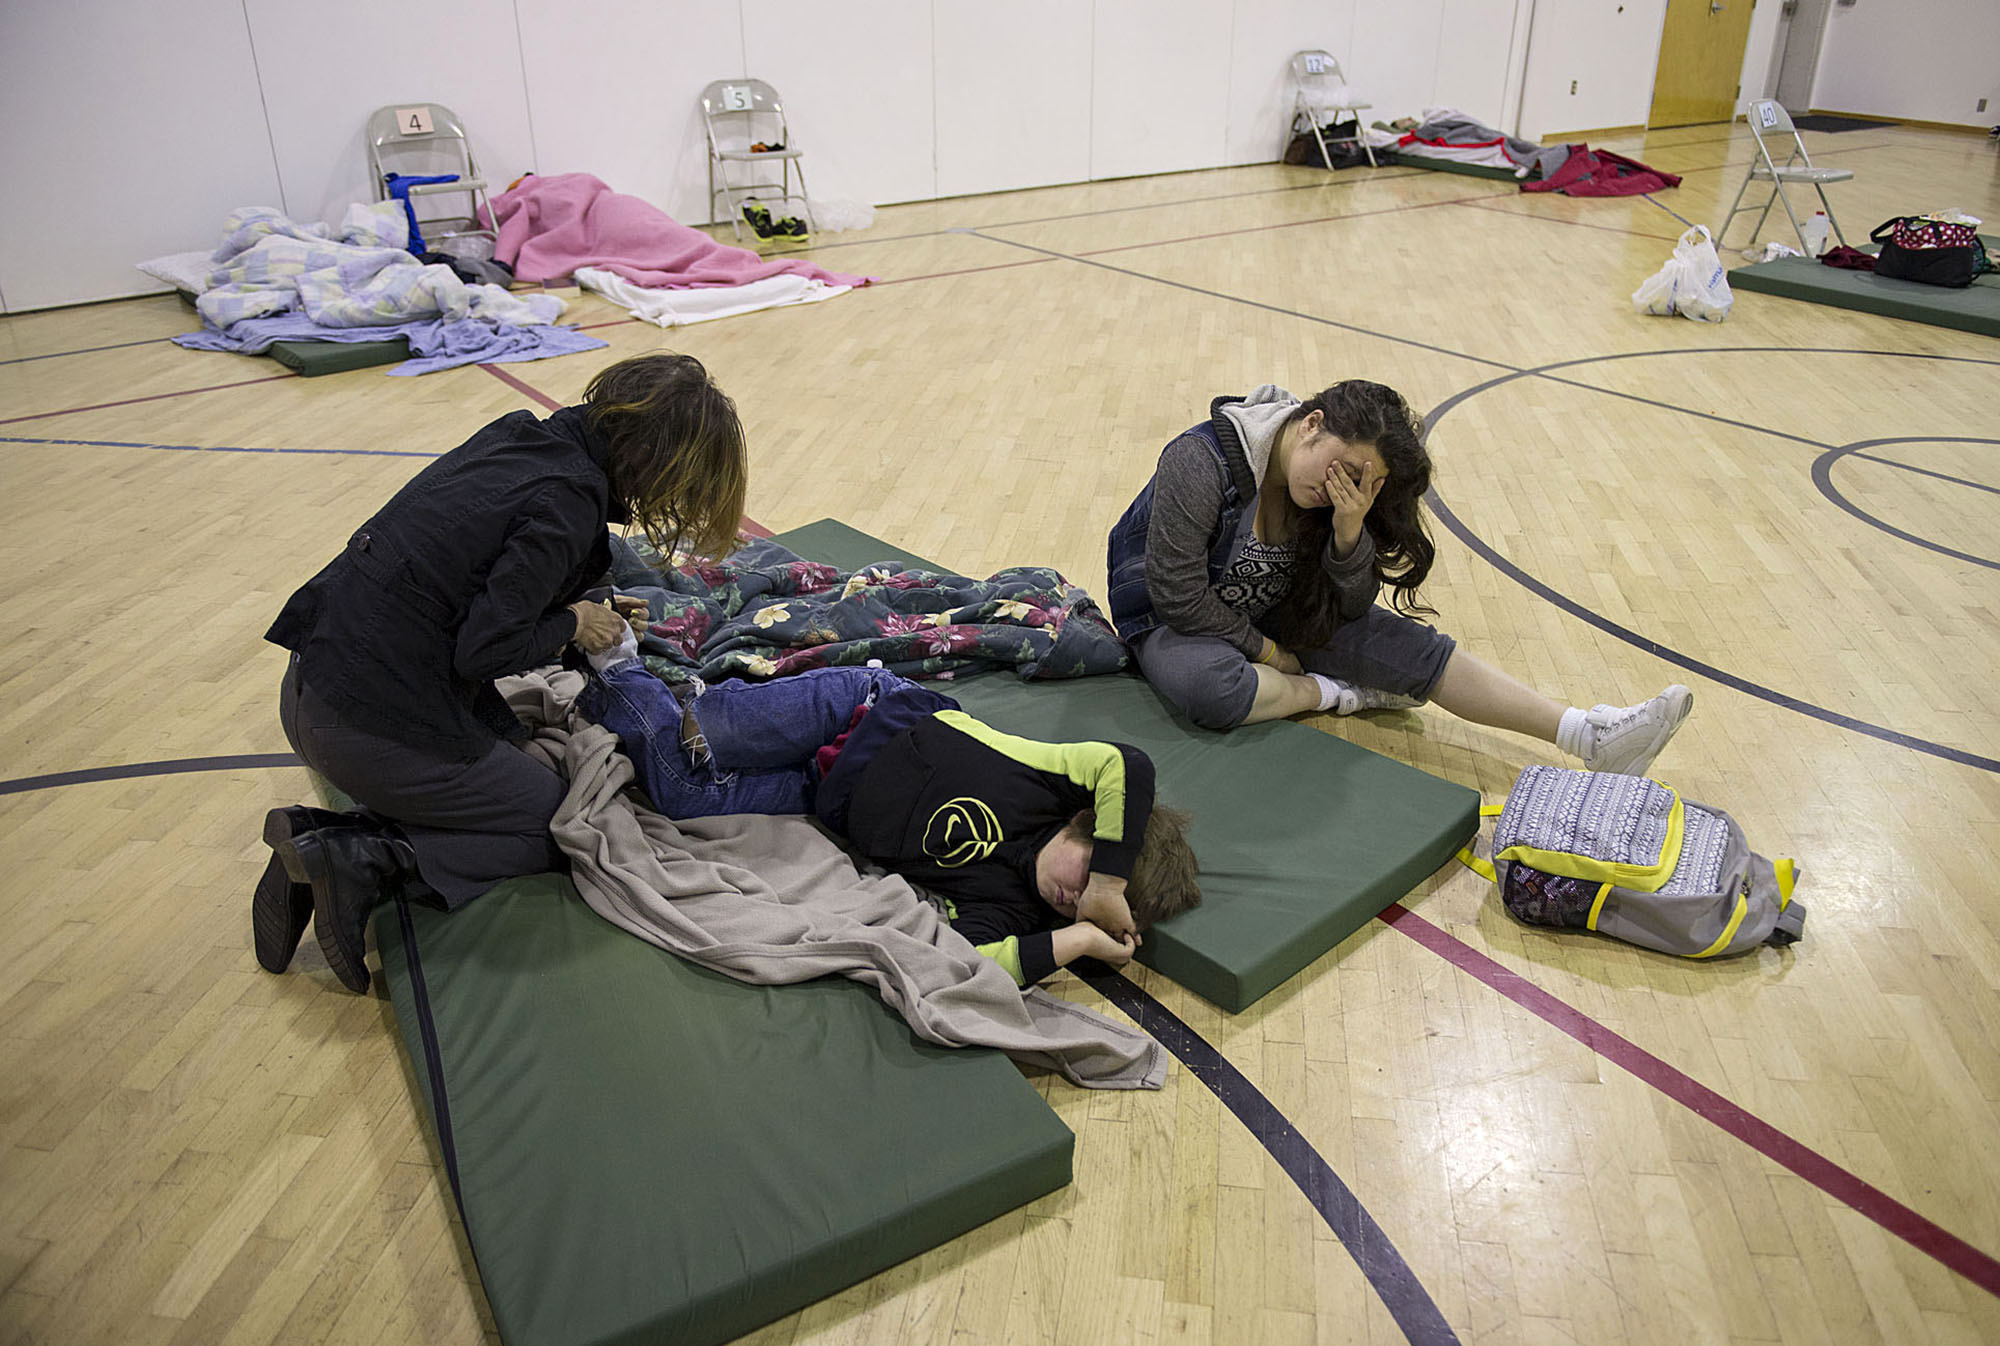 Donna Pinaula, from left, helps get her kids Johnny Pinaula, 7, and Shyanne Tanguileg, 16, ready as they slowly wake up at 6:45 a.m. after sleeping on the floor of the St. Andrew Lutheran Church gym Tuesday morning, Nov. 17, 2015 in Vancouver. The Winter Hospitality Overflow shelter provides a warm place to stay to those in need during winter's coldest months. (Amanda Cowan/The Columbian)